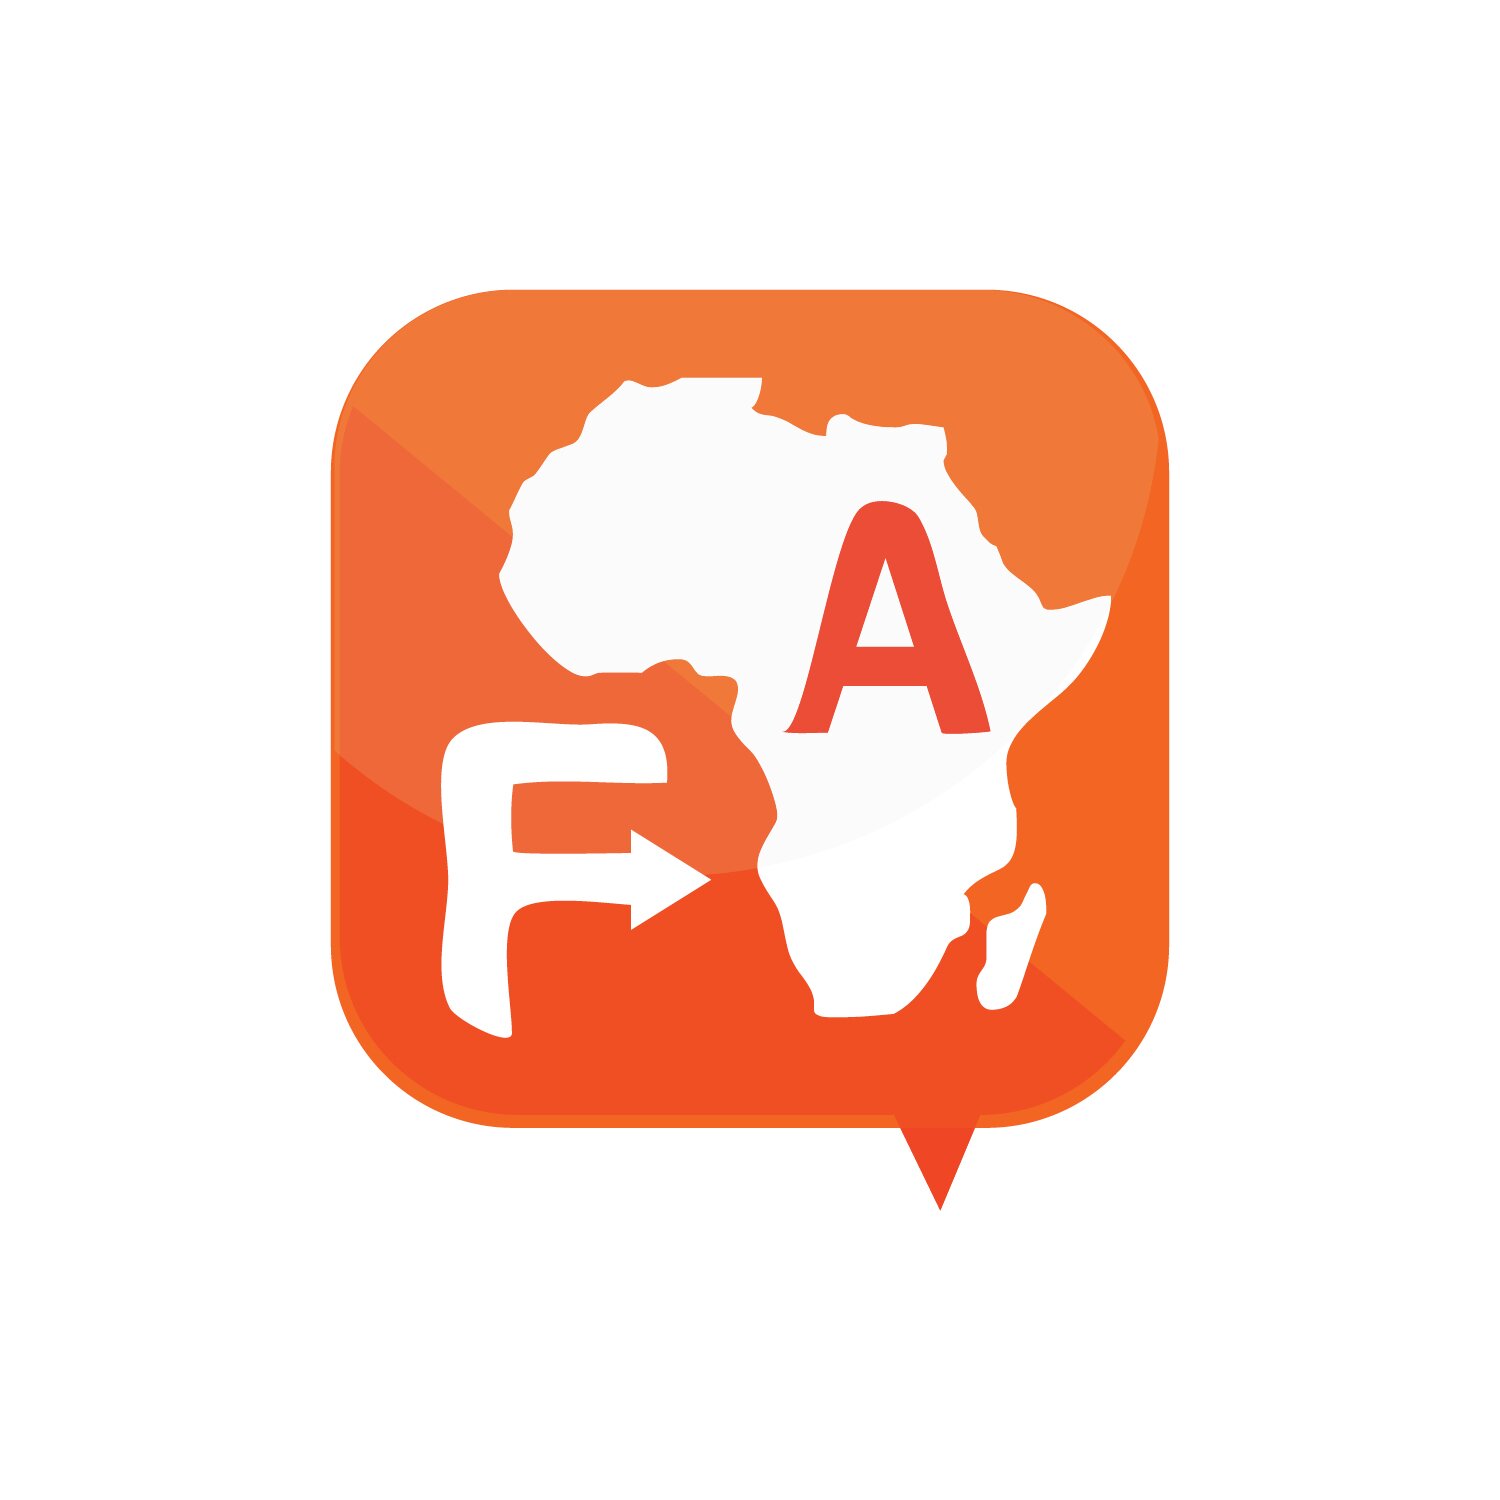 followafrica is a platform that helps you interact,discover,share and promote Africa. http://t.co/0imvCZlMmS